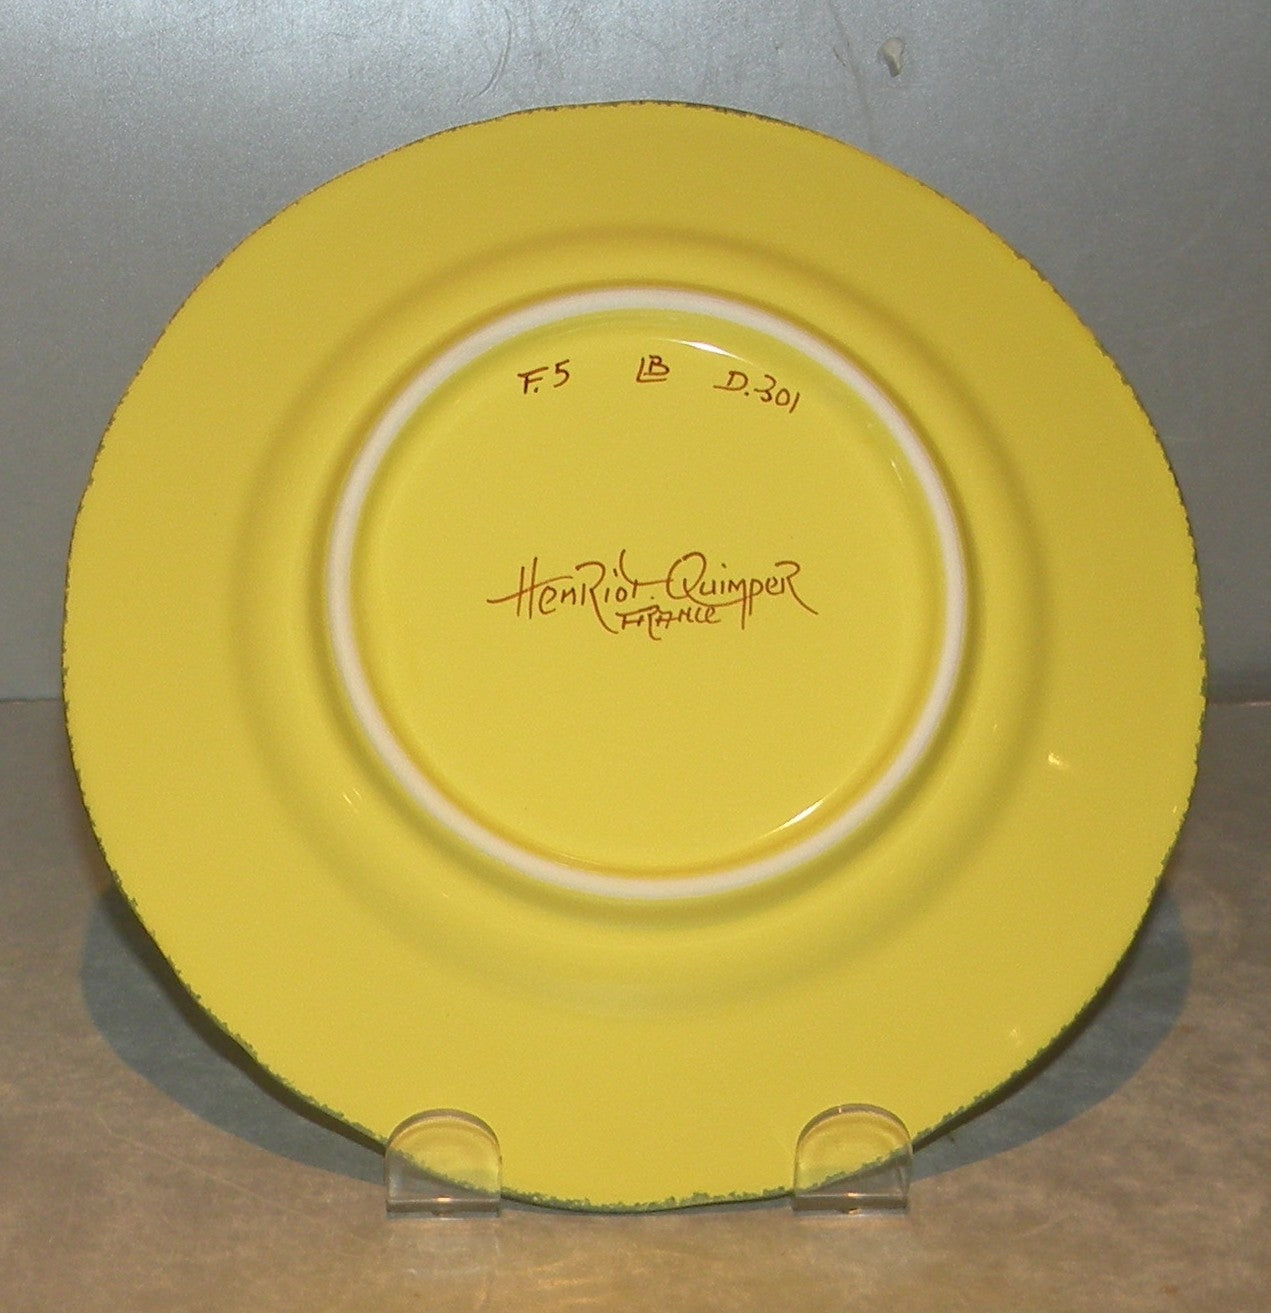 Scalloped Bread & Butter Plate with lady, Soleil Yellow